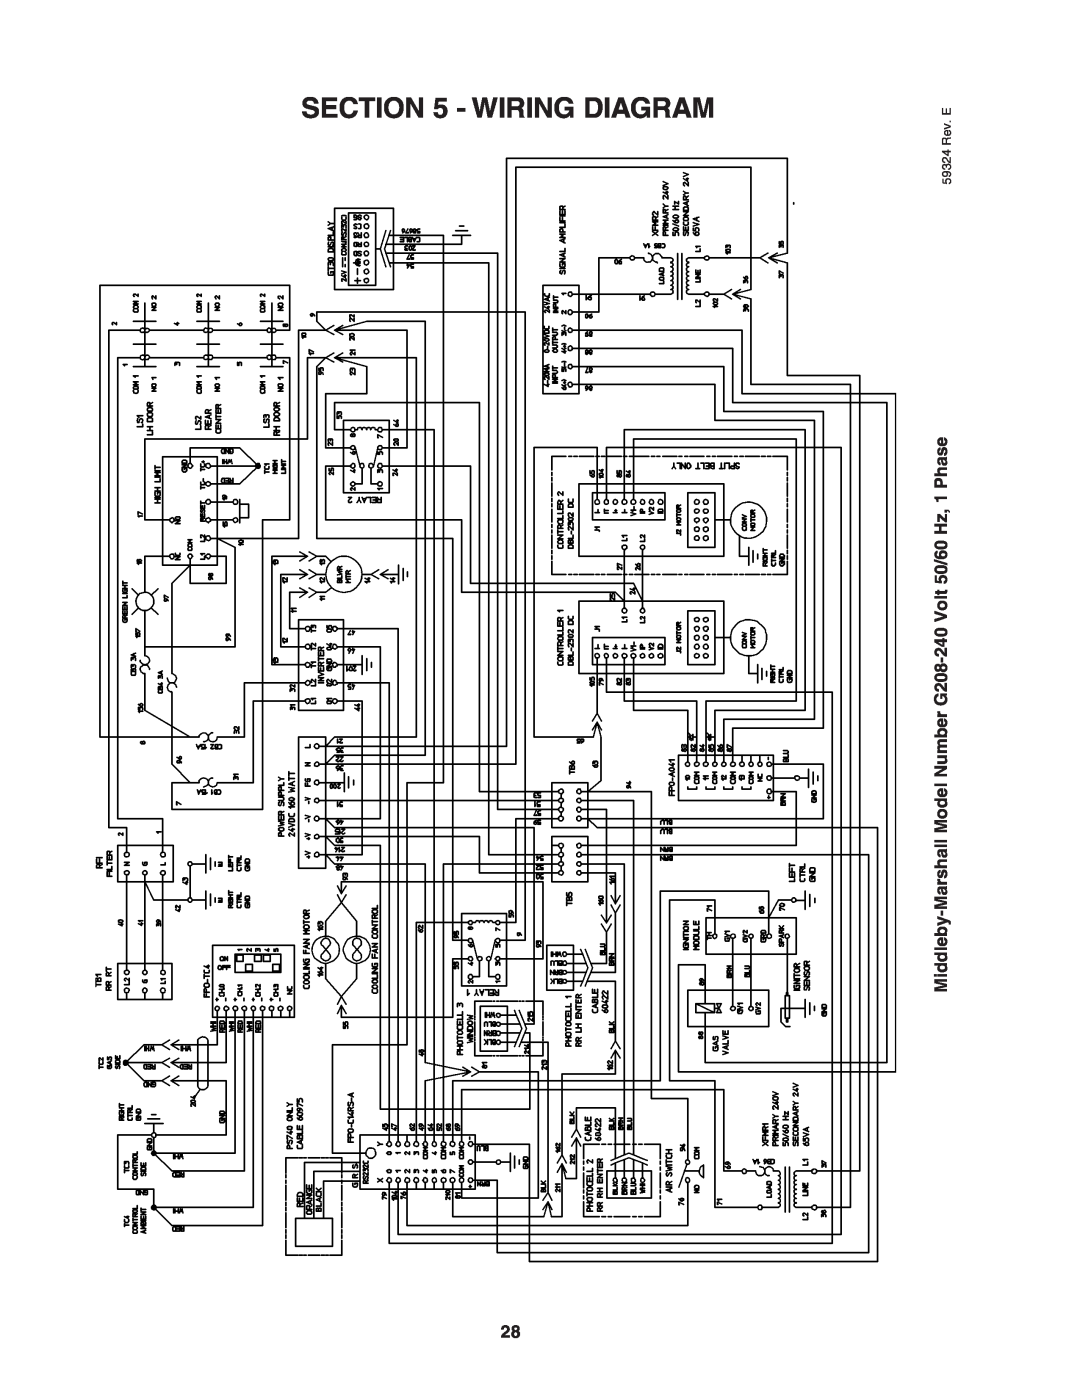 Middleby Marshall PS840 Series Wiring Diagram, Middleby-Marshall Model Number G208-240 Volt 50/60 Hz, 1 Phase 